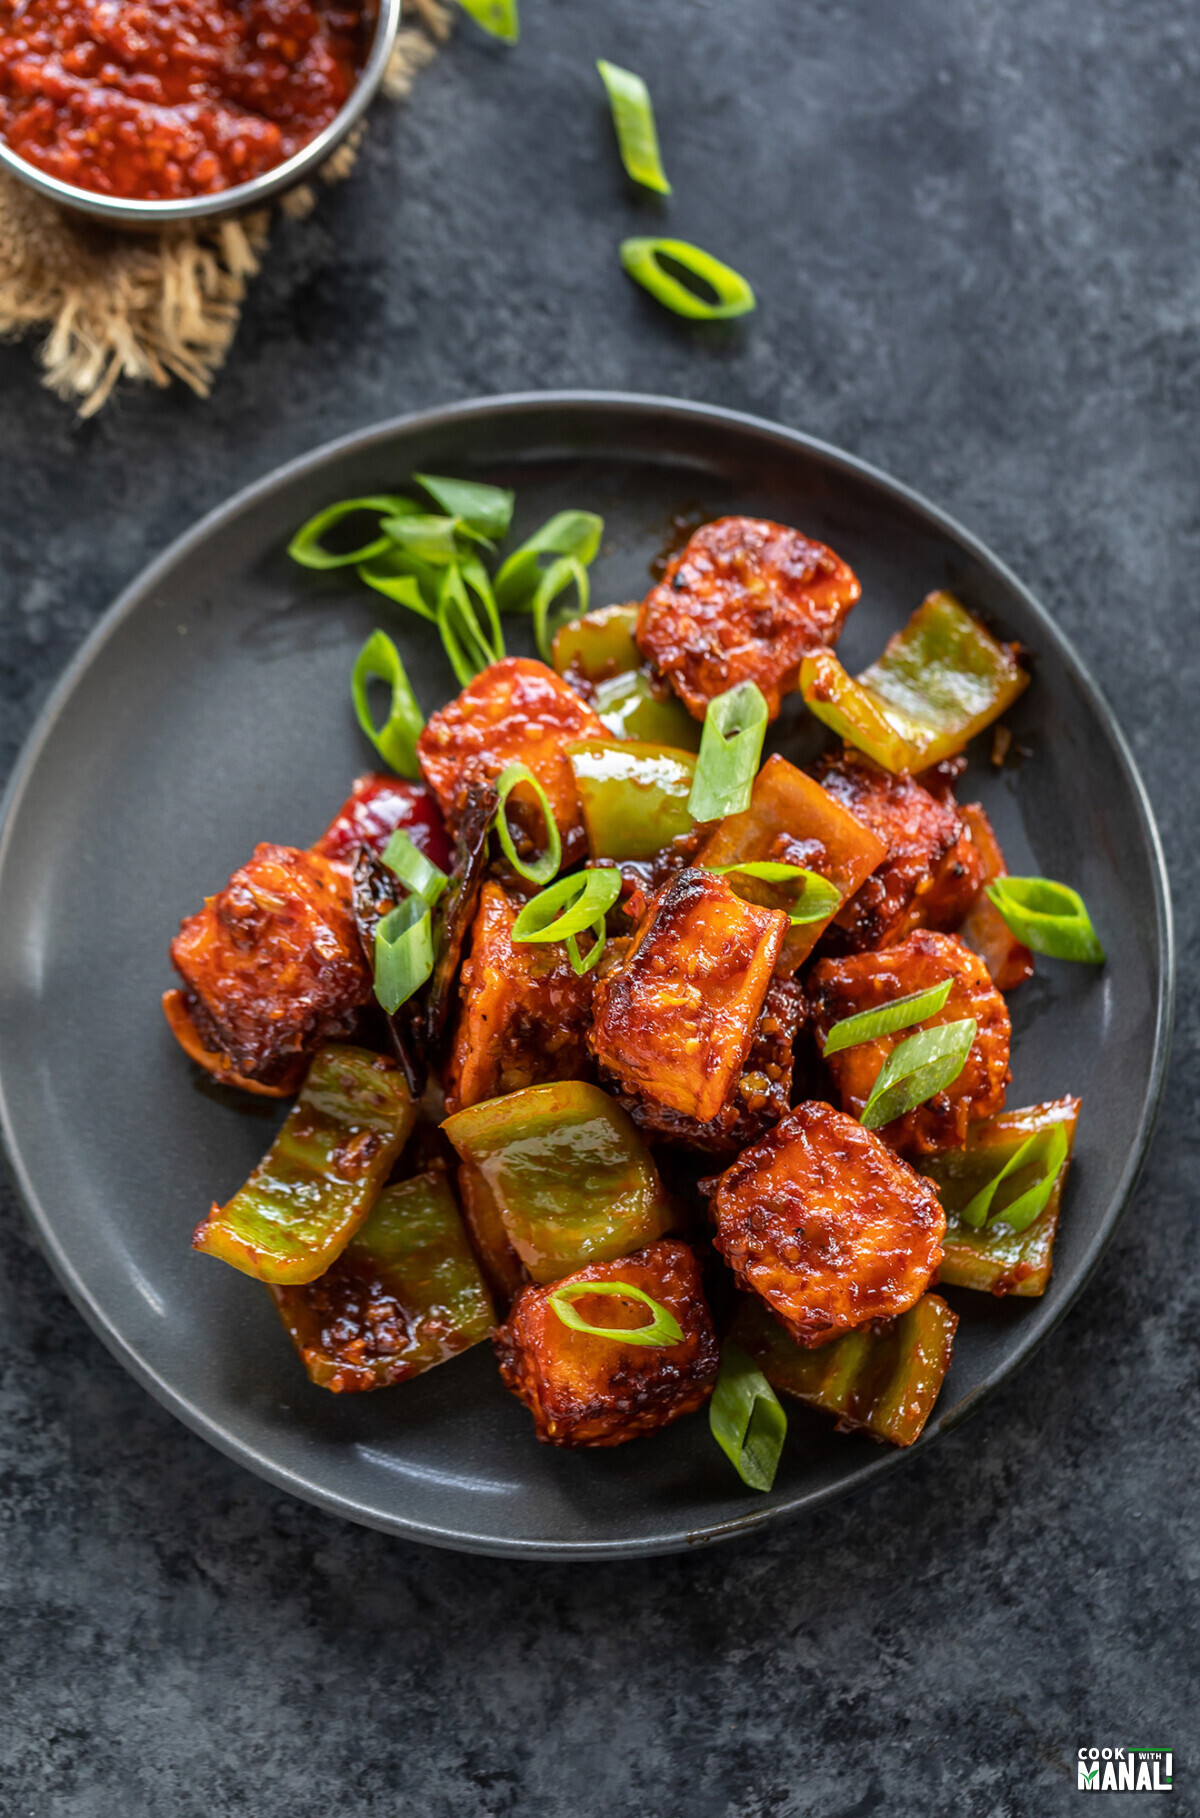 paneer cubes tossed in sauce garnished with green onions